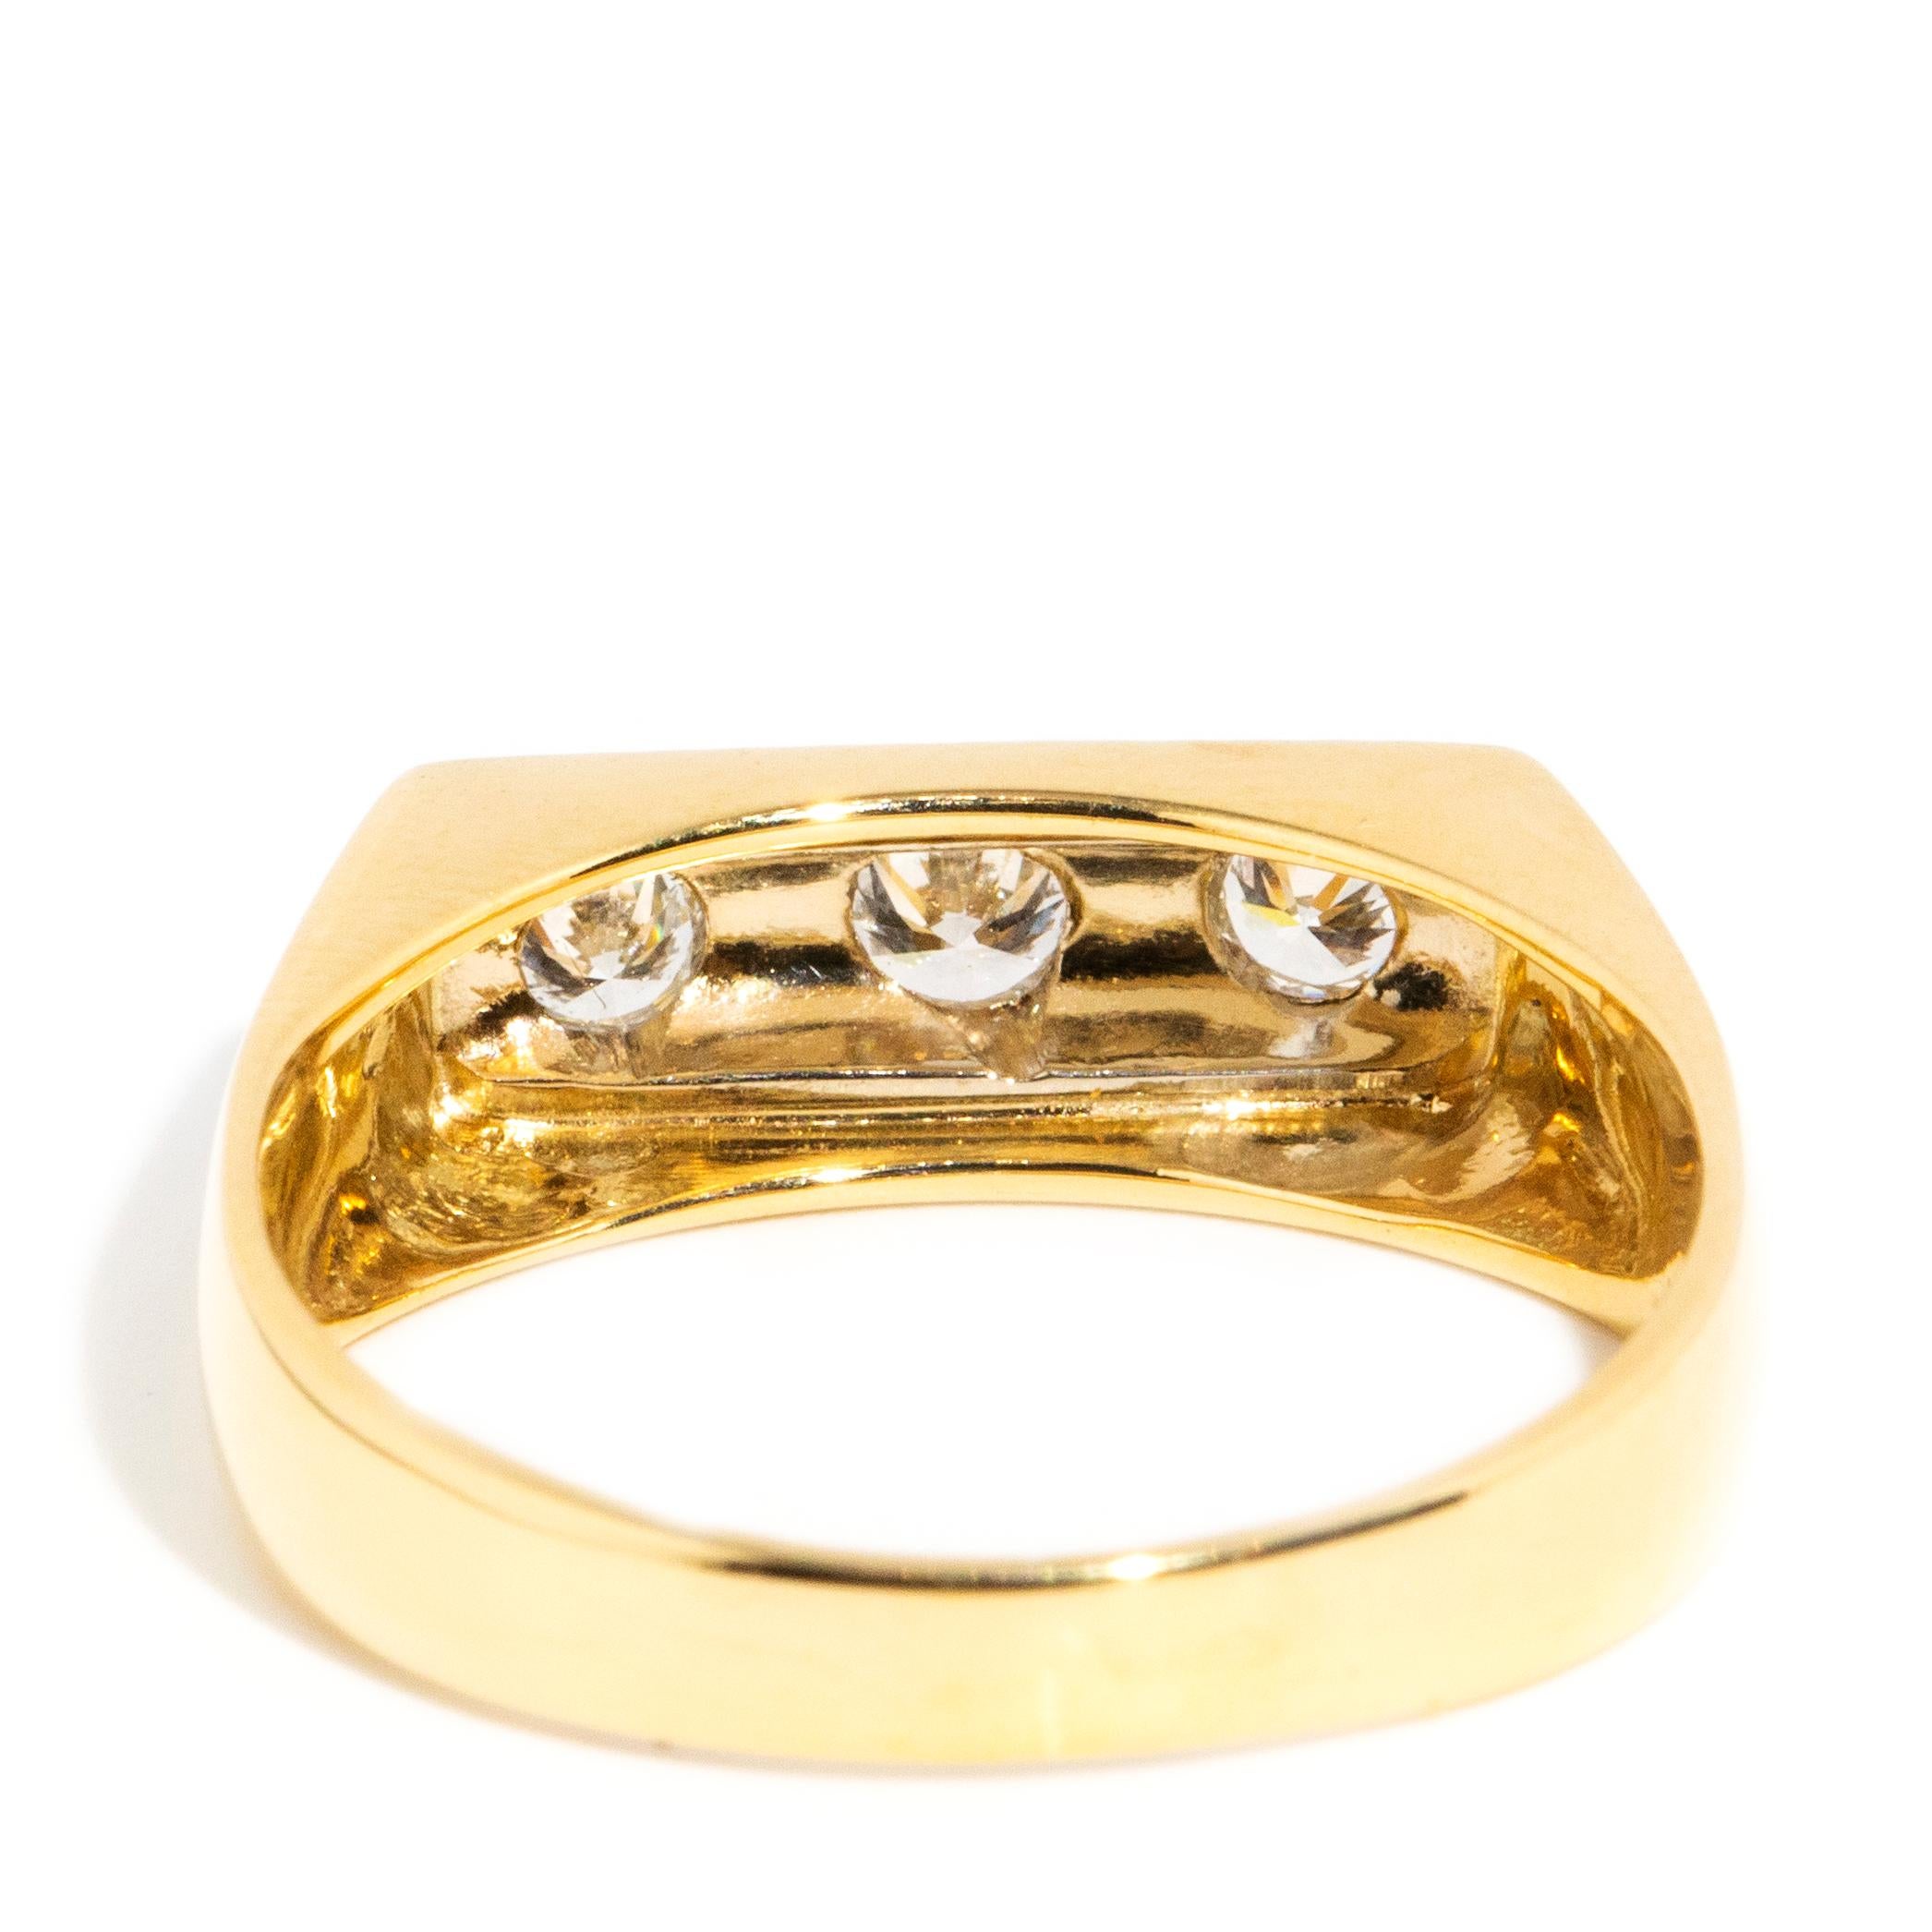 Vintage circa 1960s 14 Carat Yellow Gold Partial Rubover Diamond Signet Ring For Sale 3